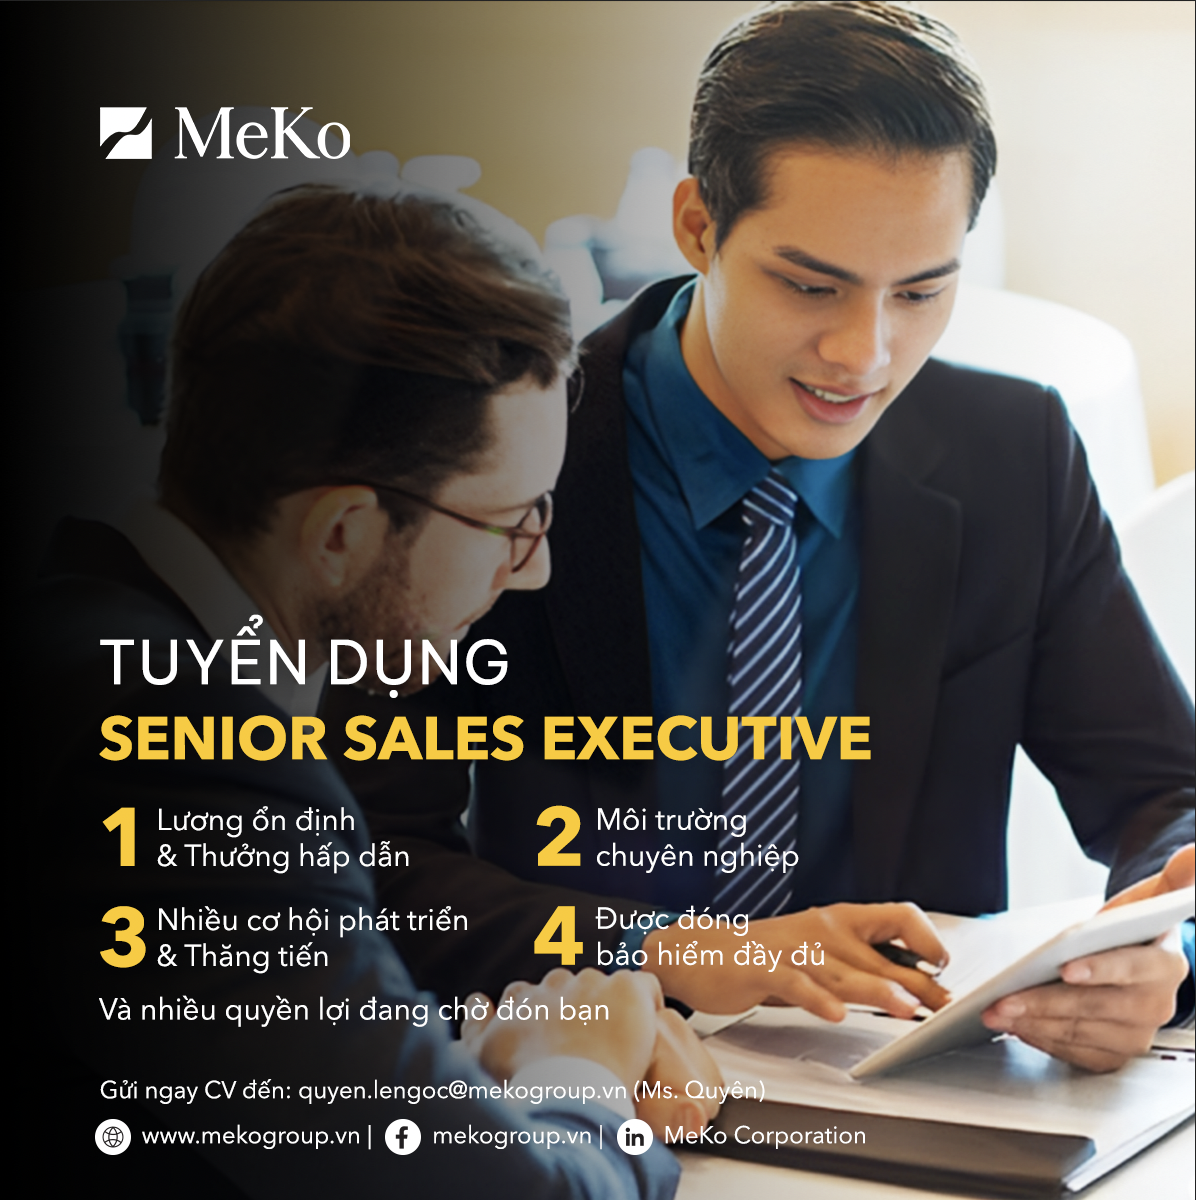 MeKo is looking for a Senior Sales Executive